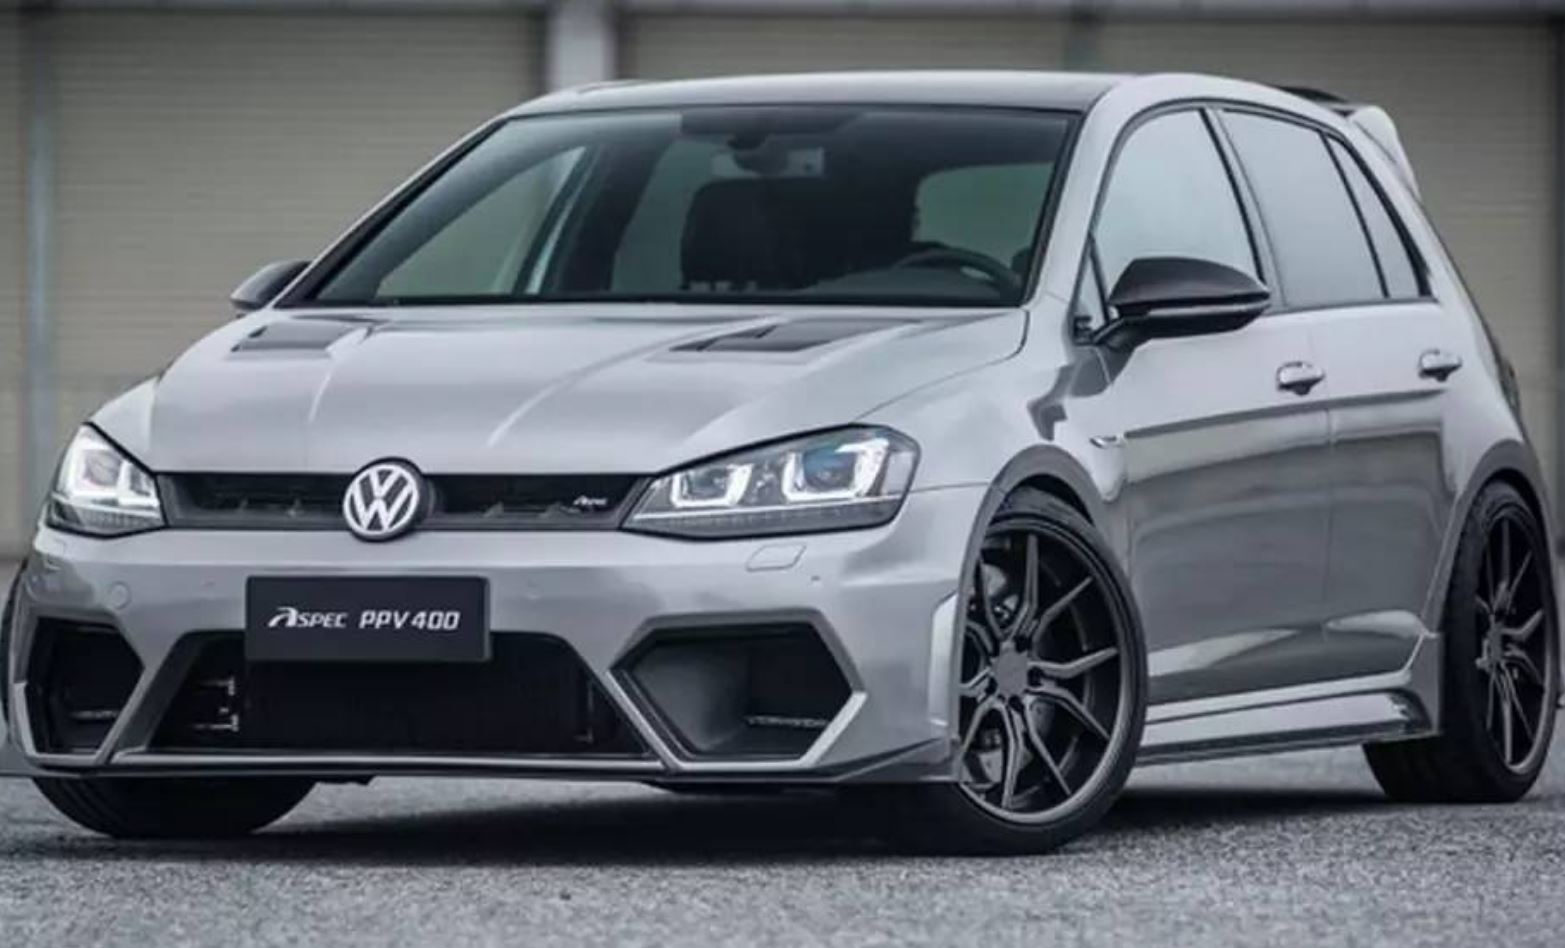 Finding the Best Sound System Replacements for Your Golf MK7